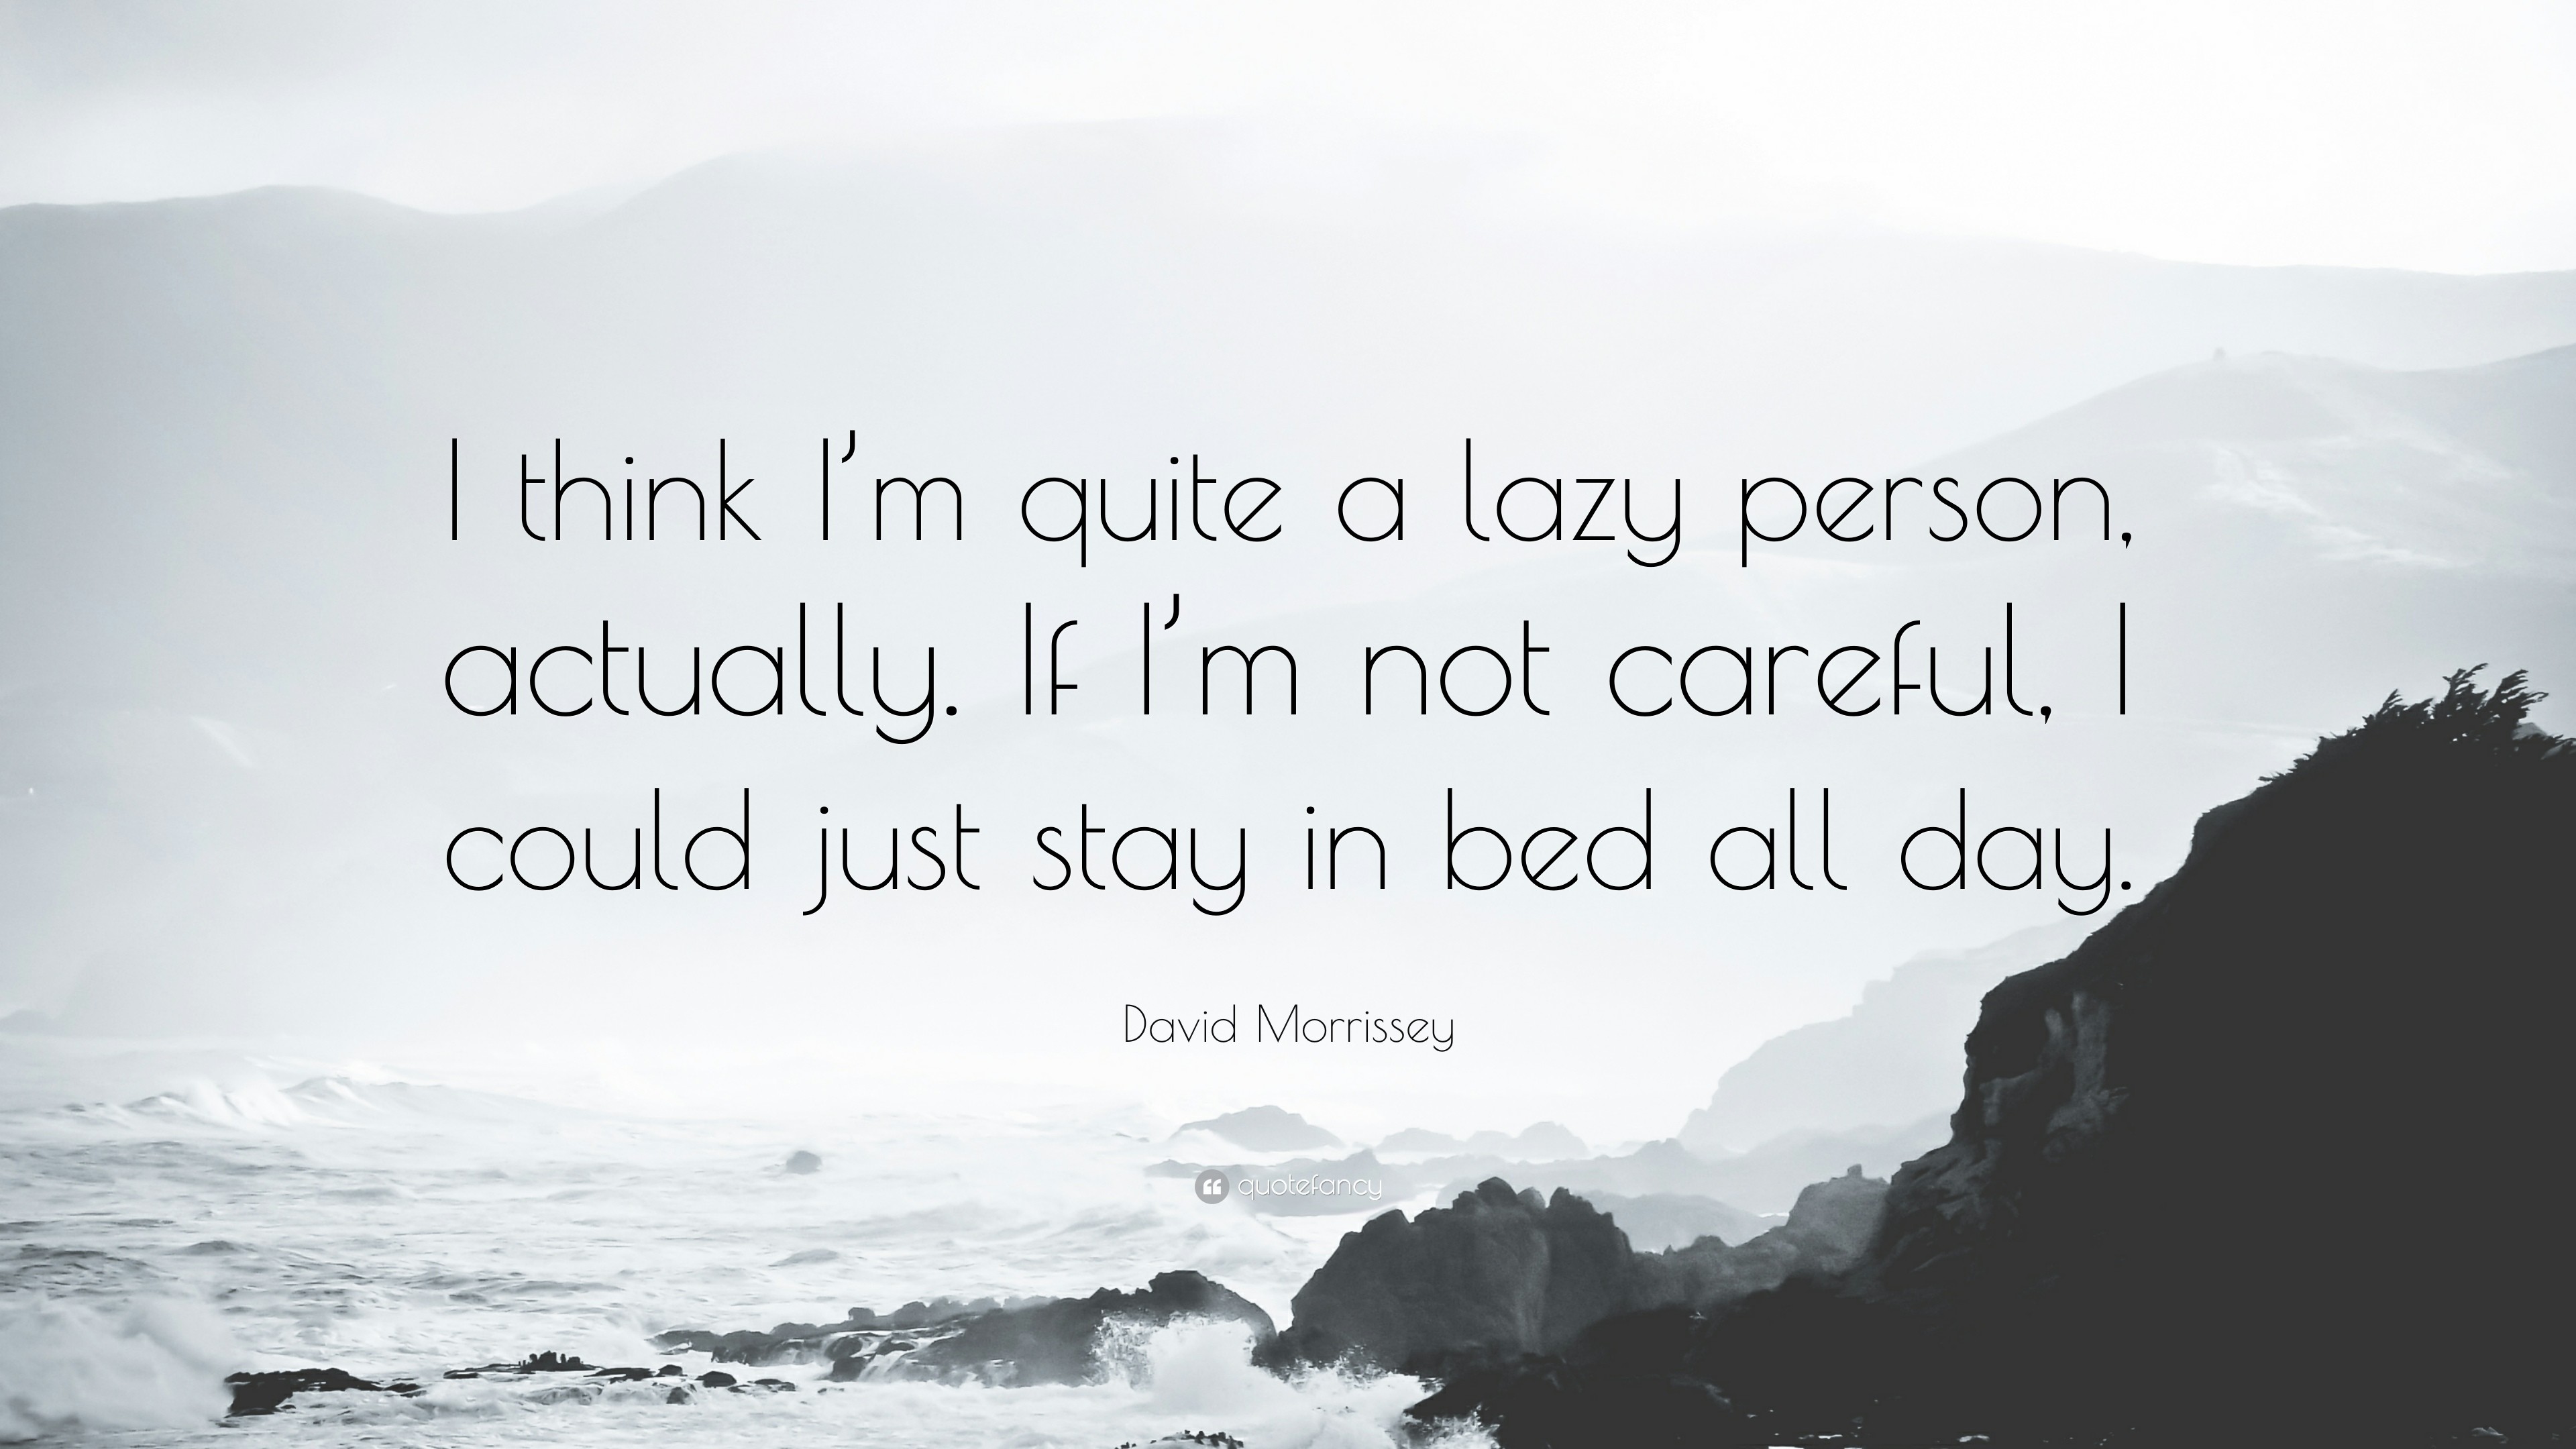 3840x2160 David Morrissey Quote: “I think I'm quite a lazy person, actually